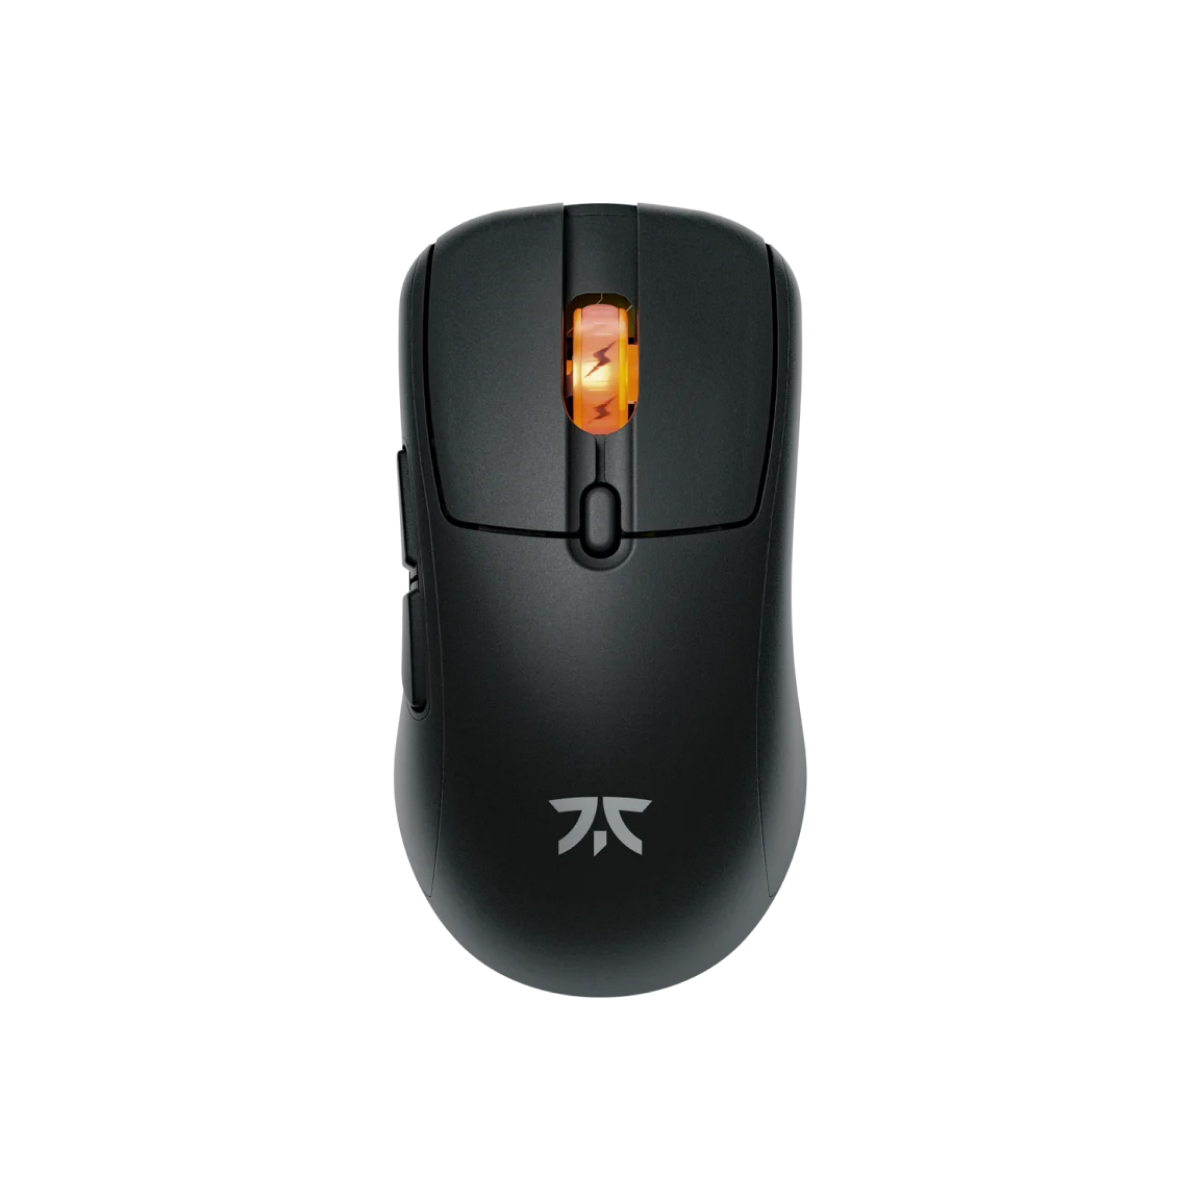 Fnatic Bolt Wireless RGB Optical Gaming Mouse - Black (MS0003-001)